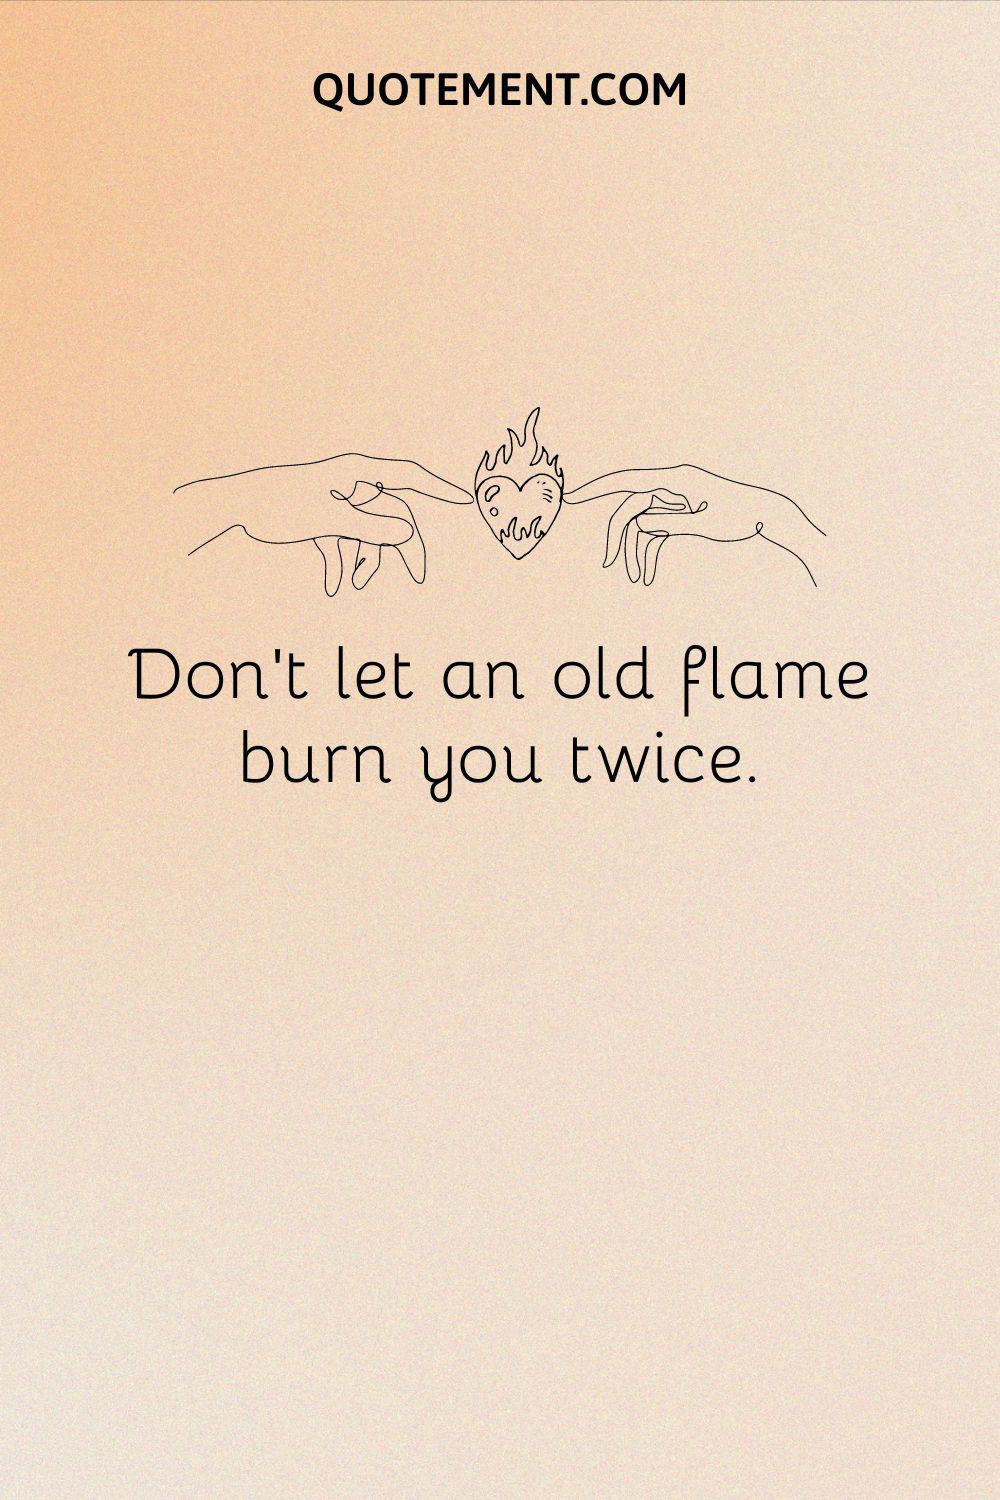 Don’t let an old flame burn you twice